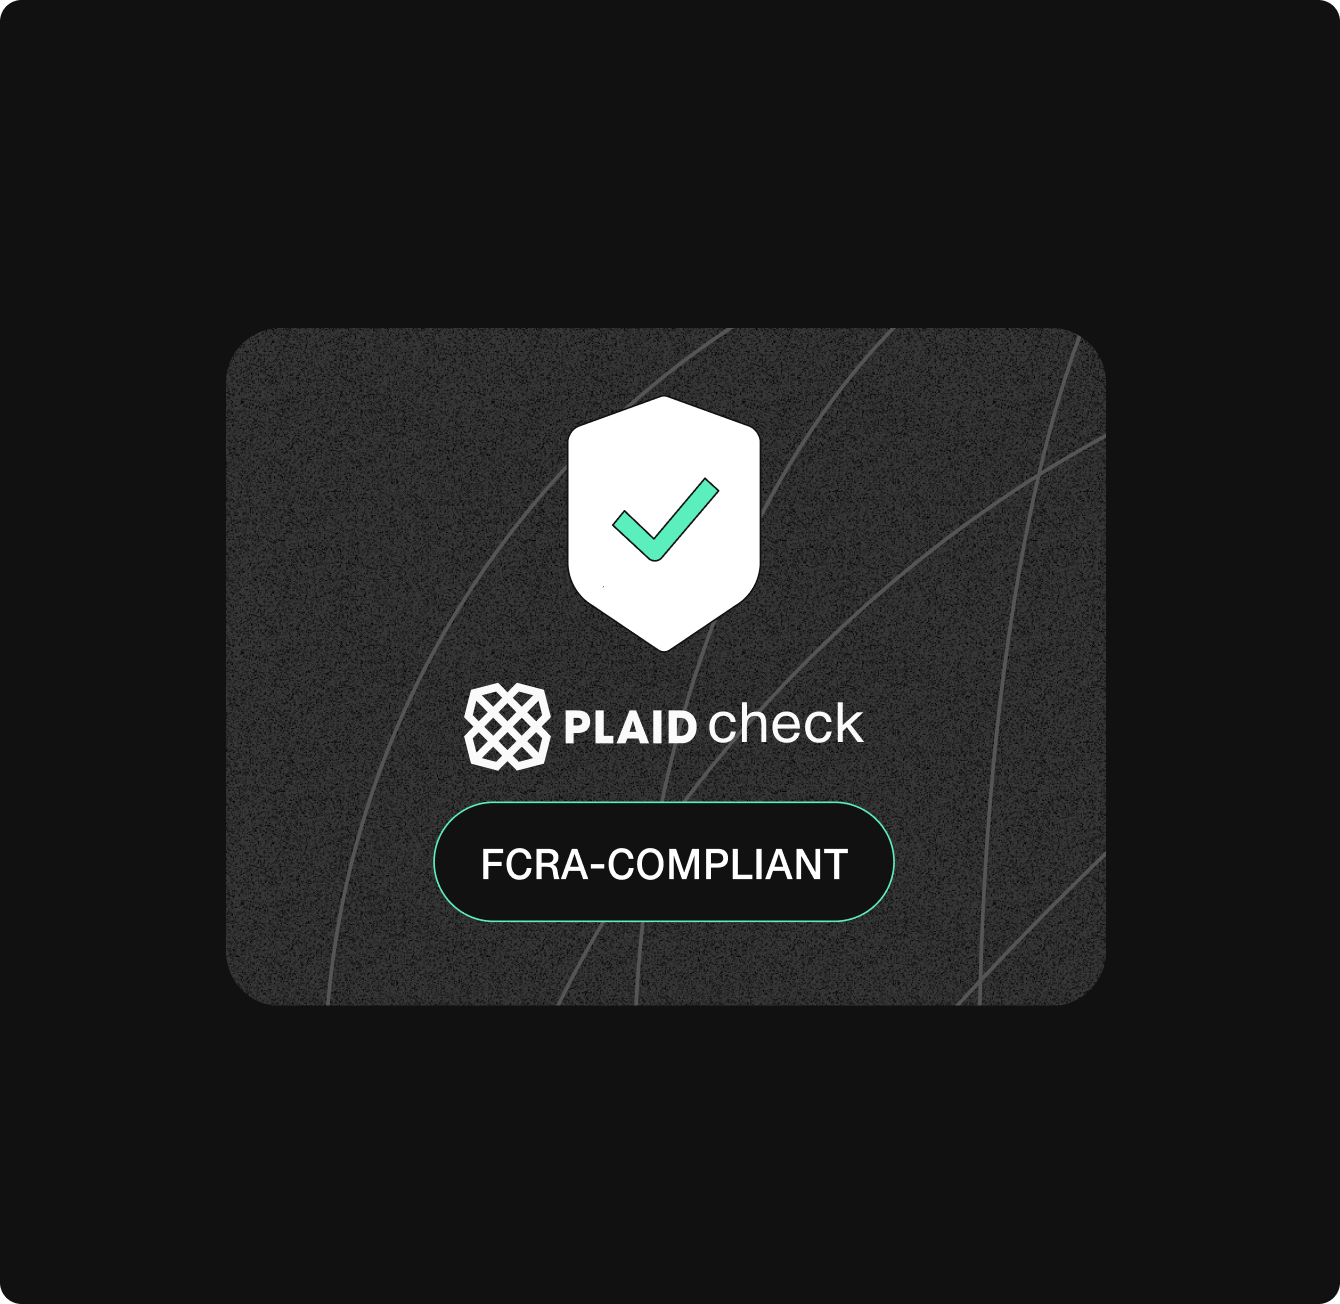 PLAIDcheck logo with a checkmark icon on a shield, indicating FCRA-compliance, on a dark background.